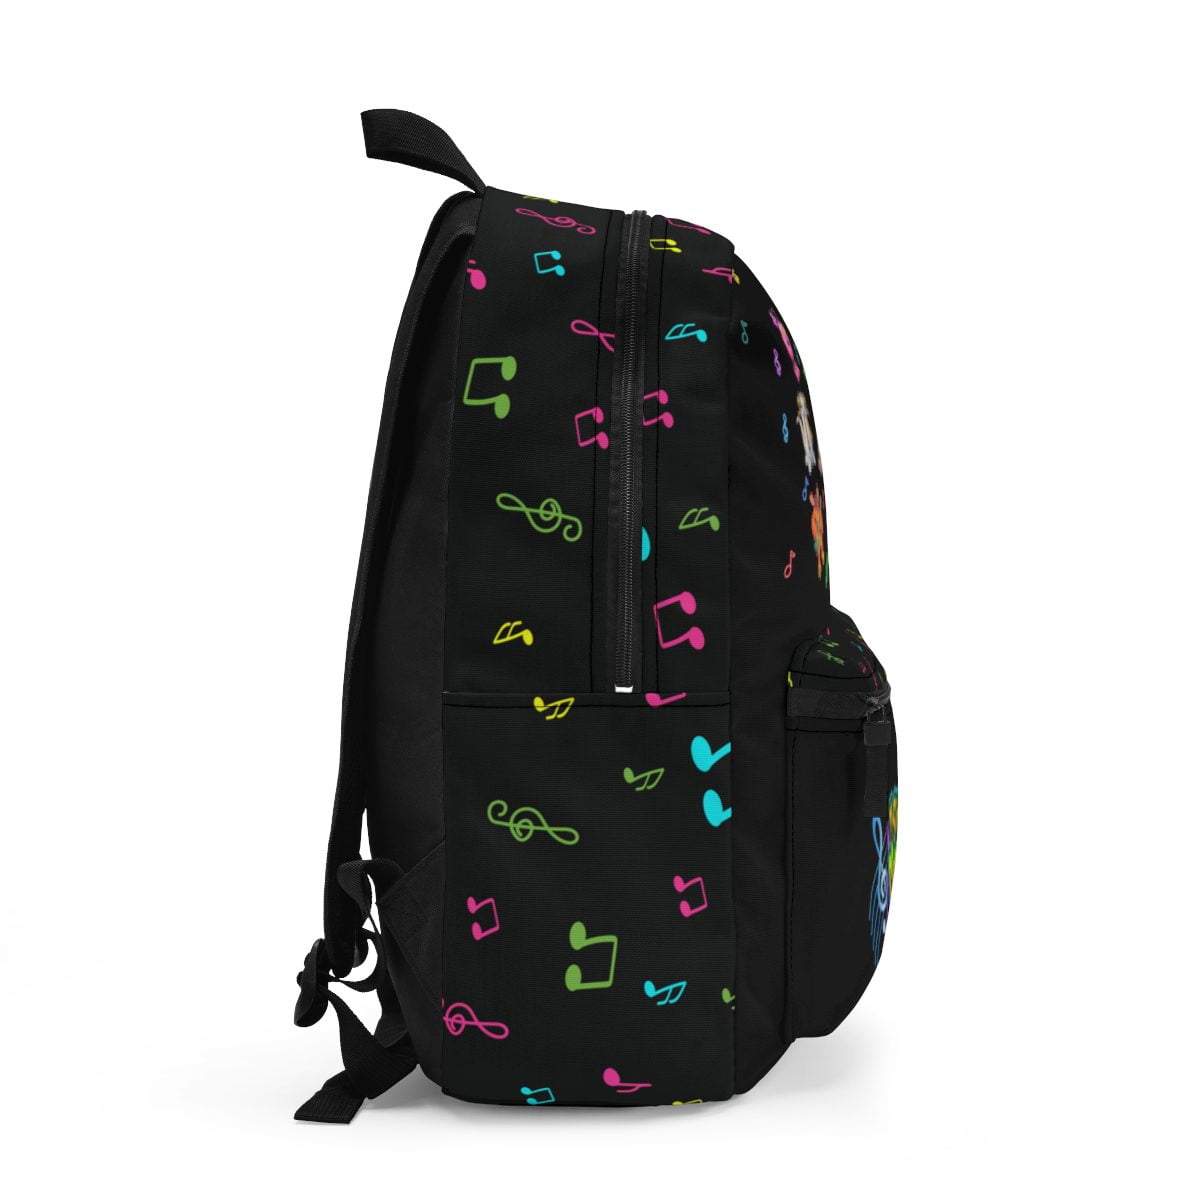 My Singing Monsters Backpack Funny and Colorful Characters Black Background Cool Kiddo 12